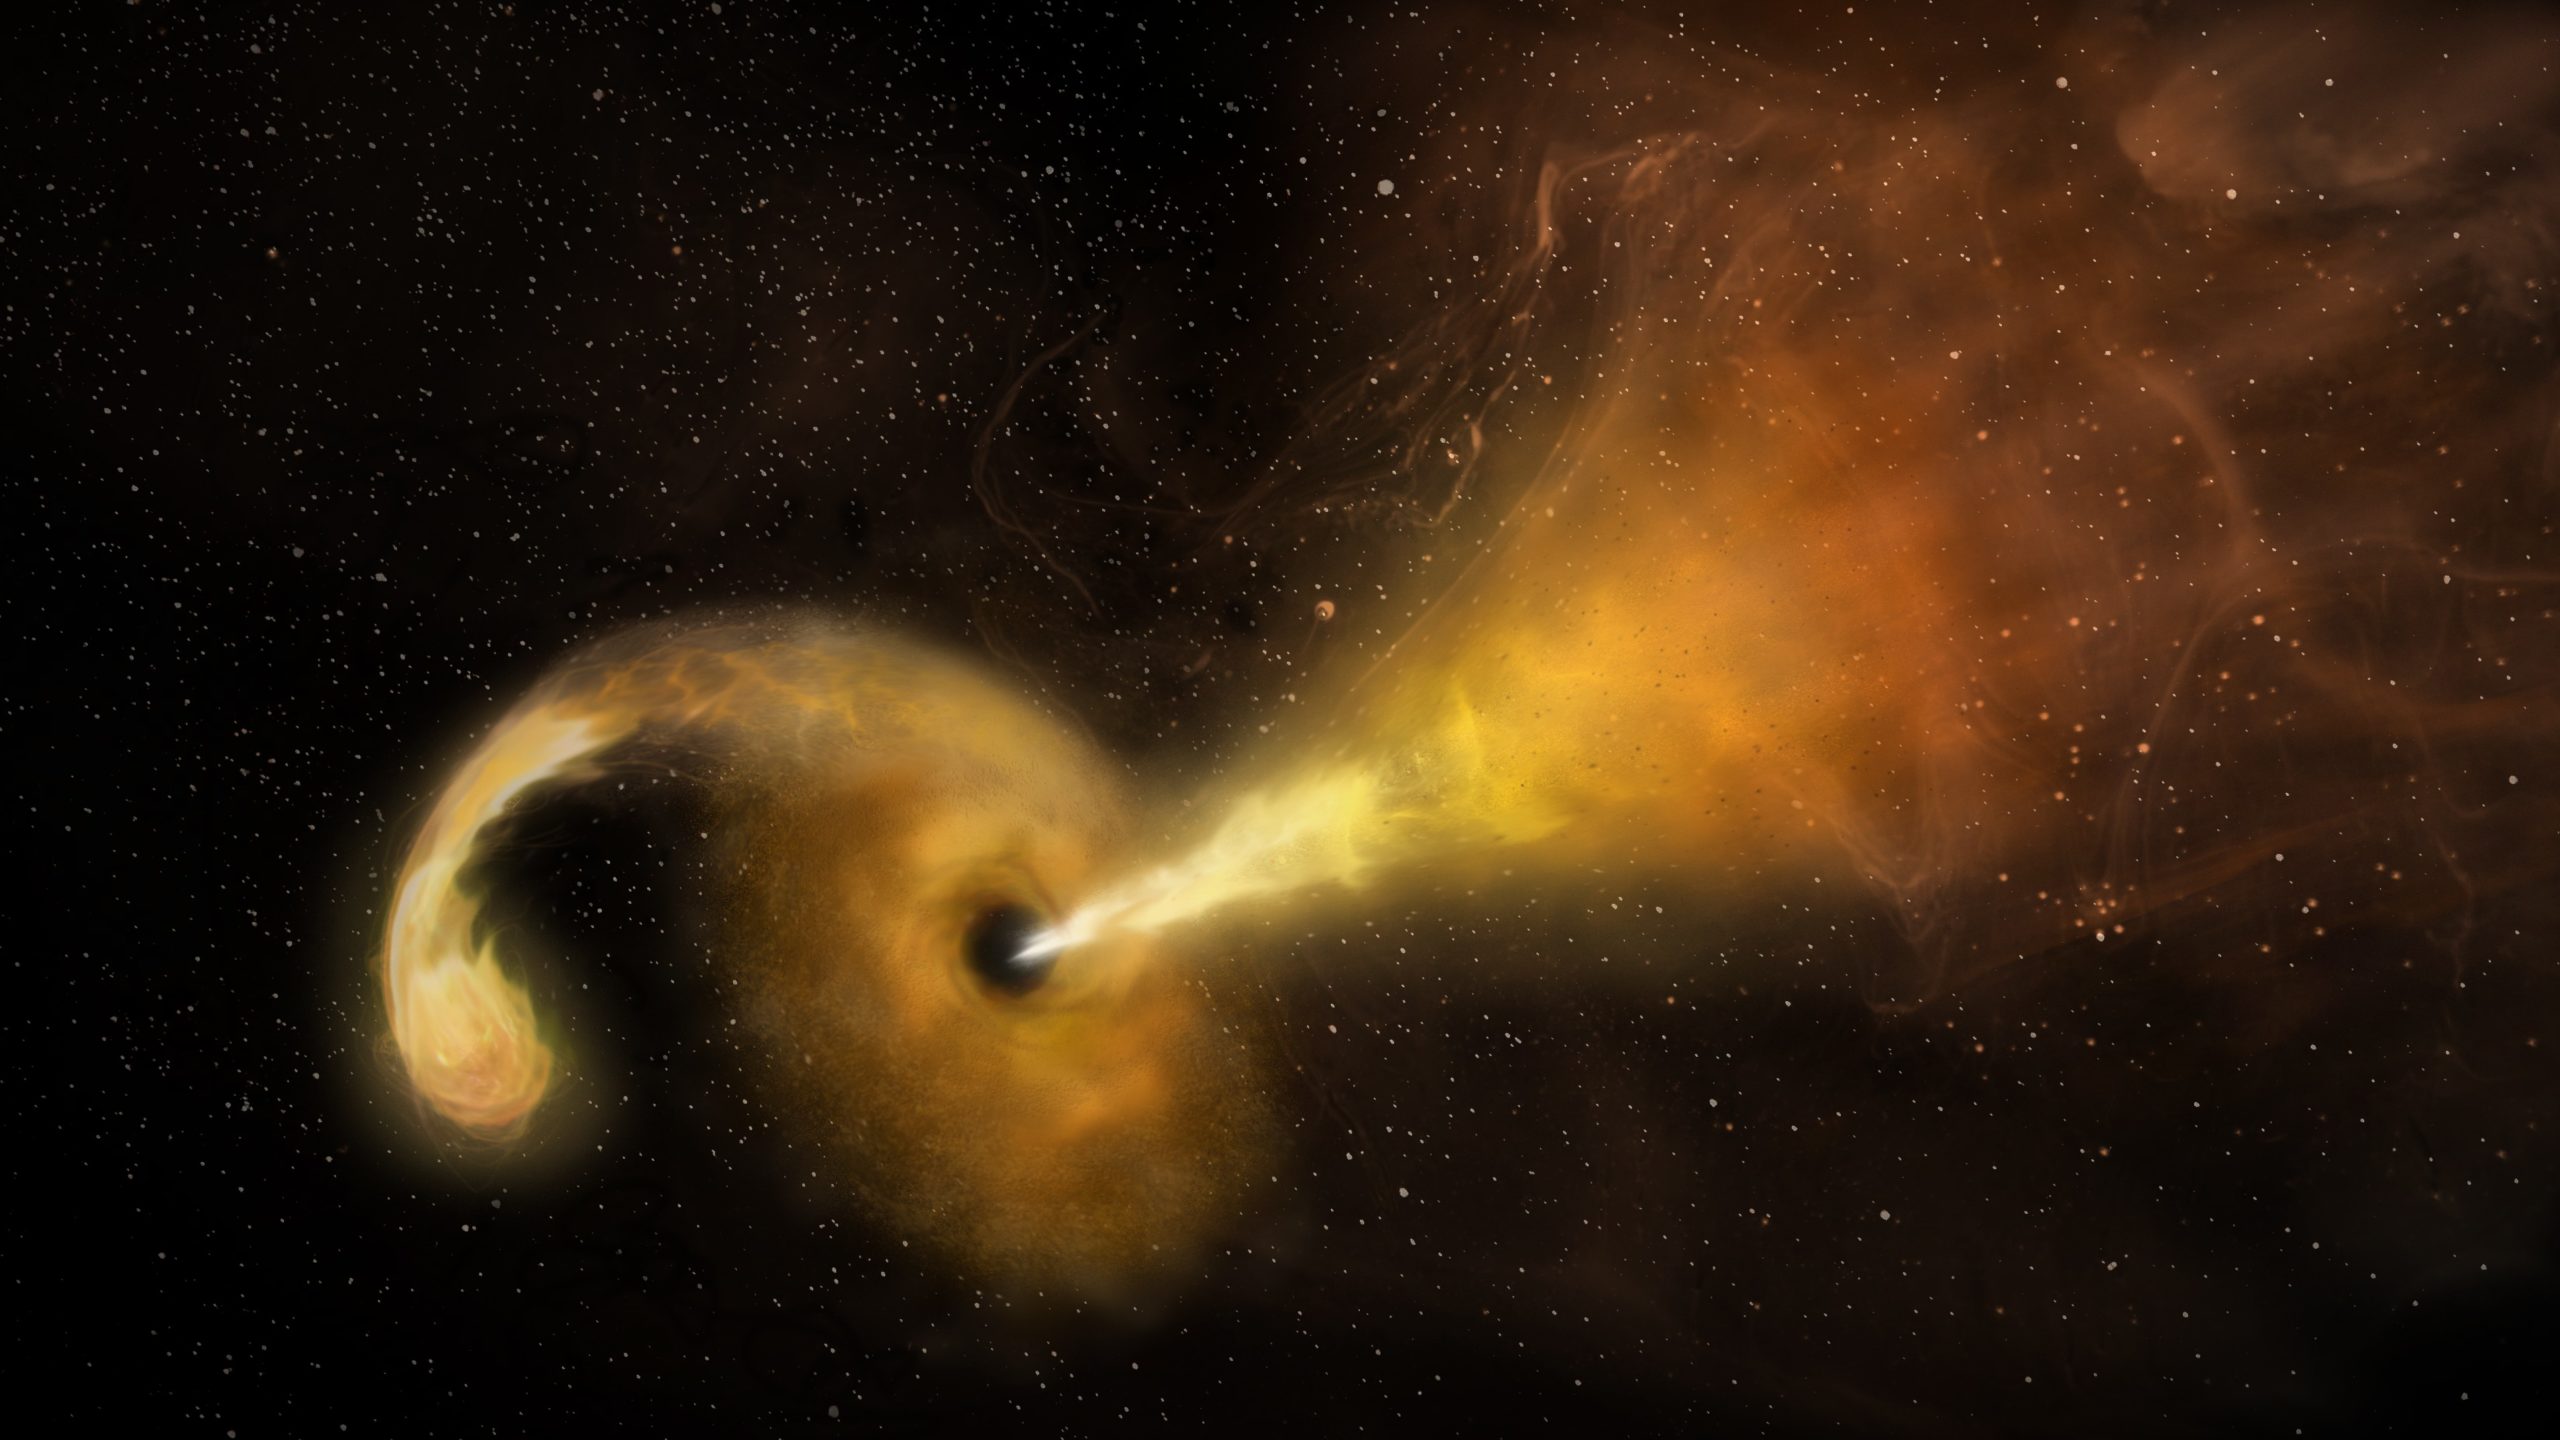 Death of a star by spaghettification; here's how it works